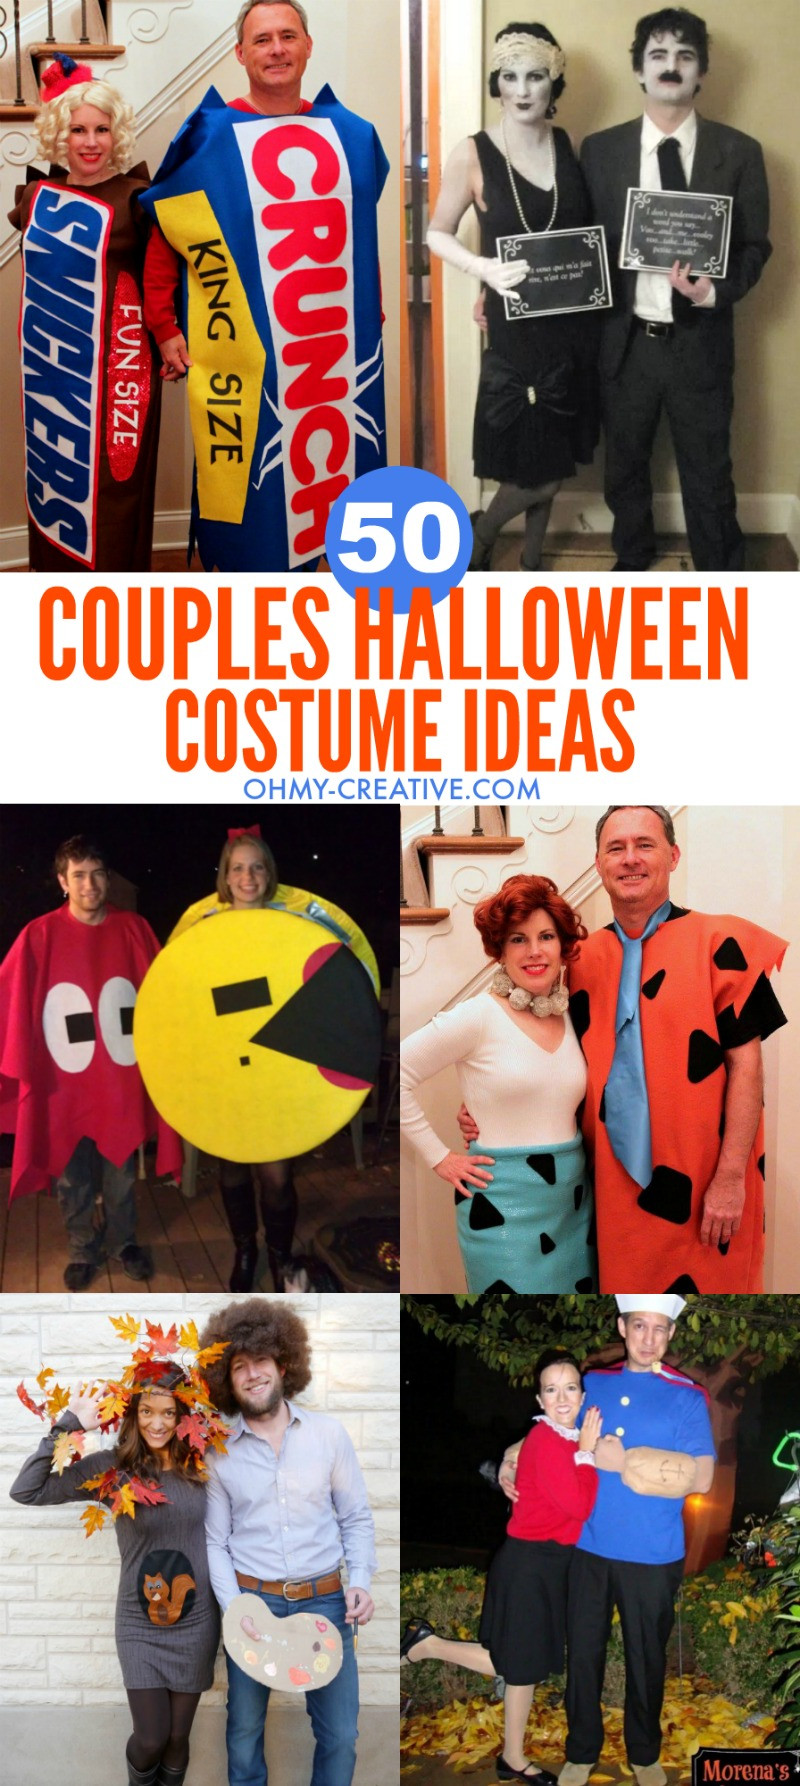 Creative DIY Halloween Costumes For Adults
 50 Couples Halloween Costume Ideas Oh My Creative